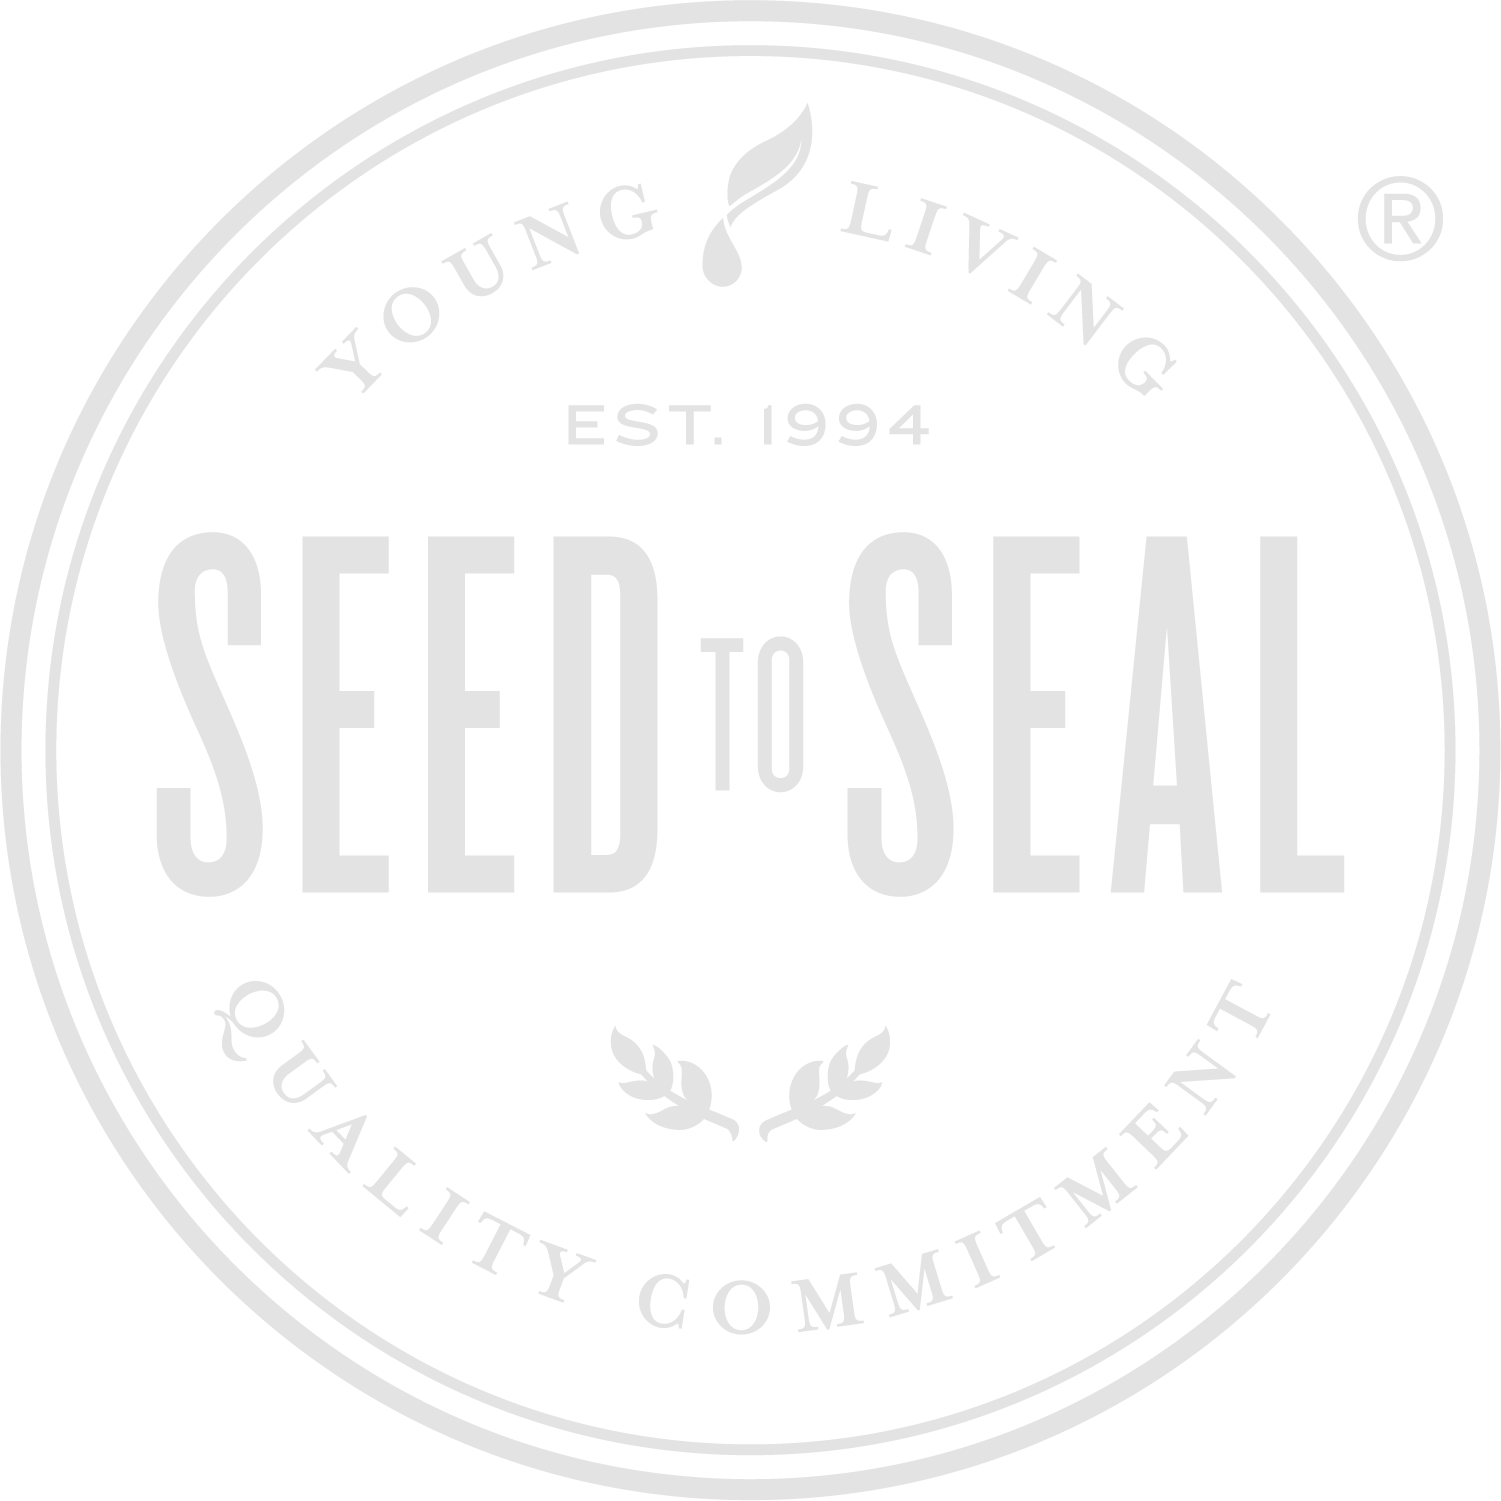 Seed to Seal